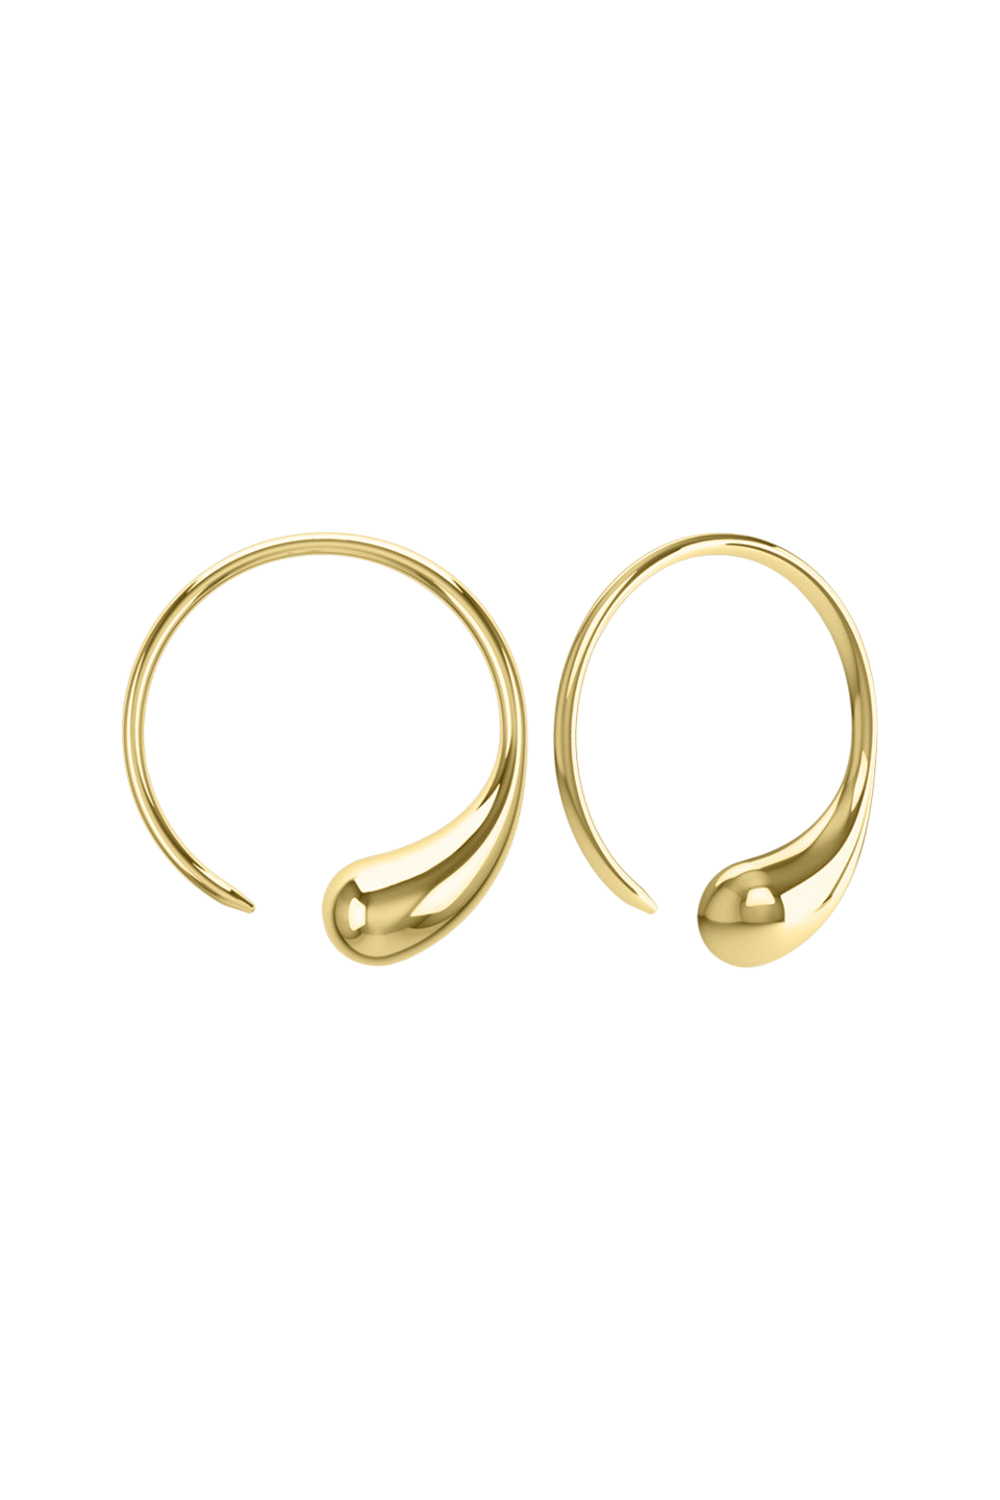 DROP cc-EARRINGS YELLOW GOLD PLATED  